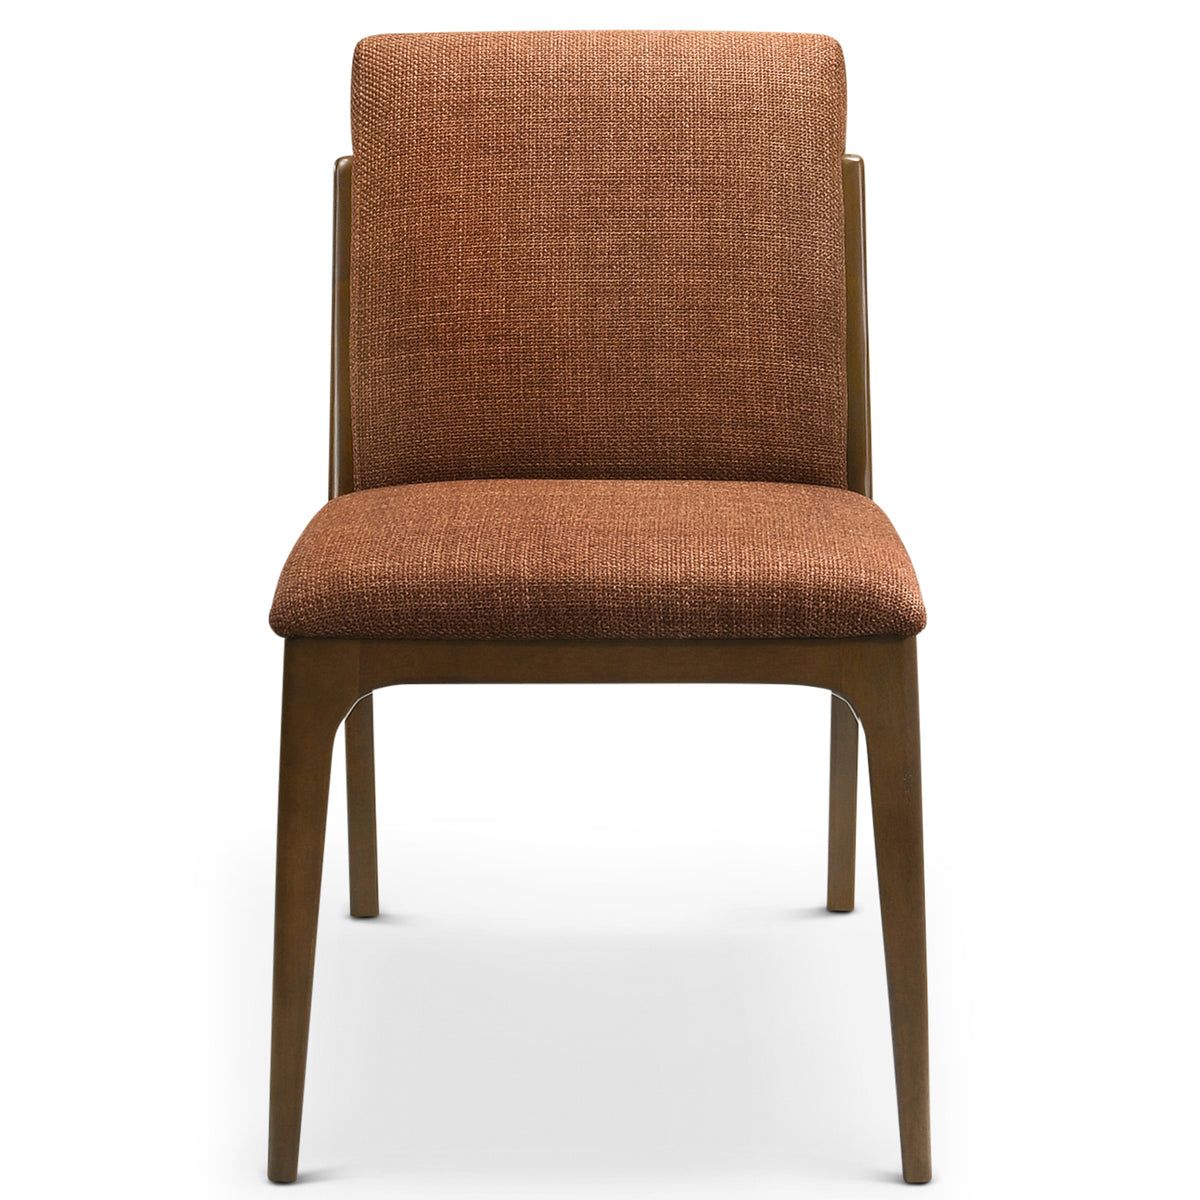 Griffin Orange Fabric Dining Chair - MidinMod Houston Tx Mid Century Furniture Store - Dining Chairs 8